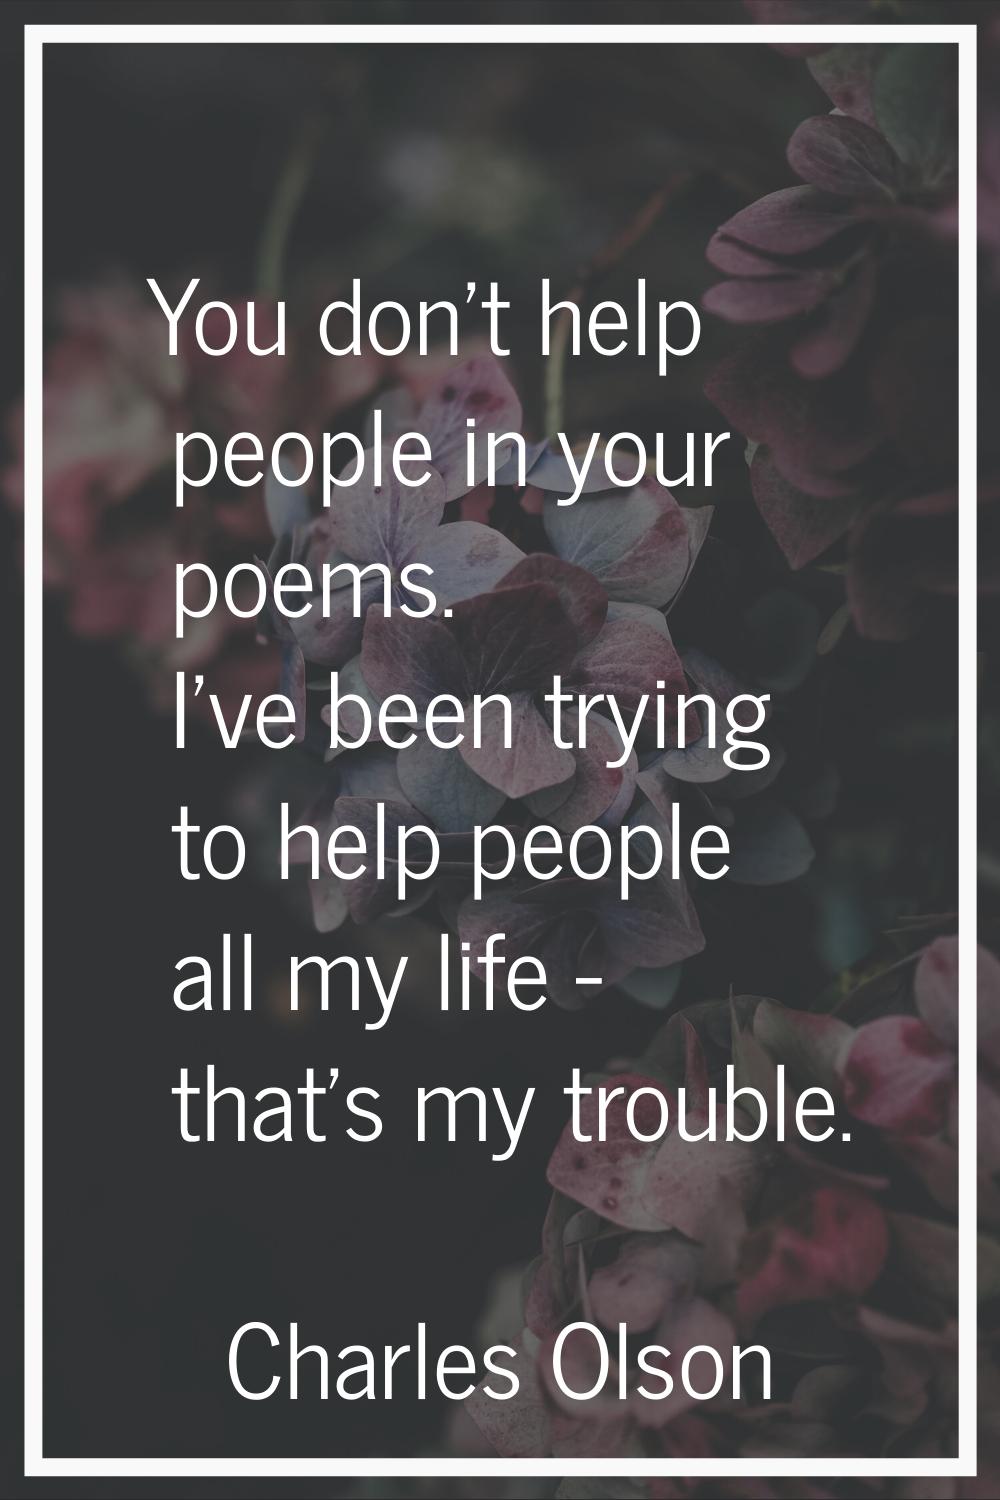 You don't help people in your poems. I've been trying to help people all my life - that's my troubl